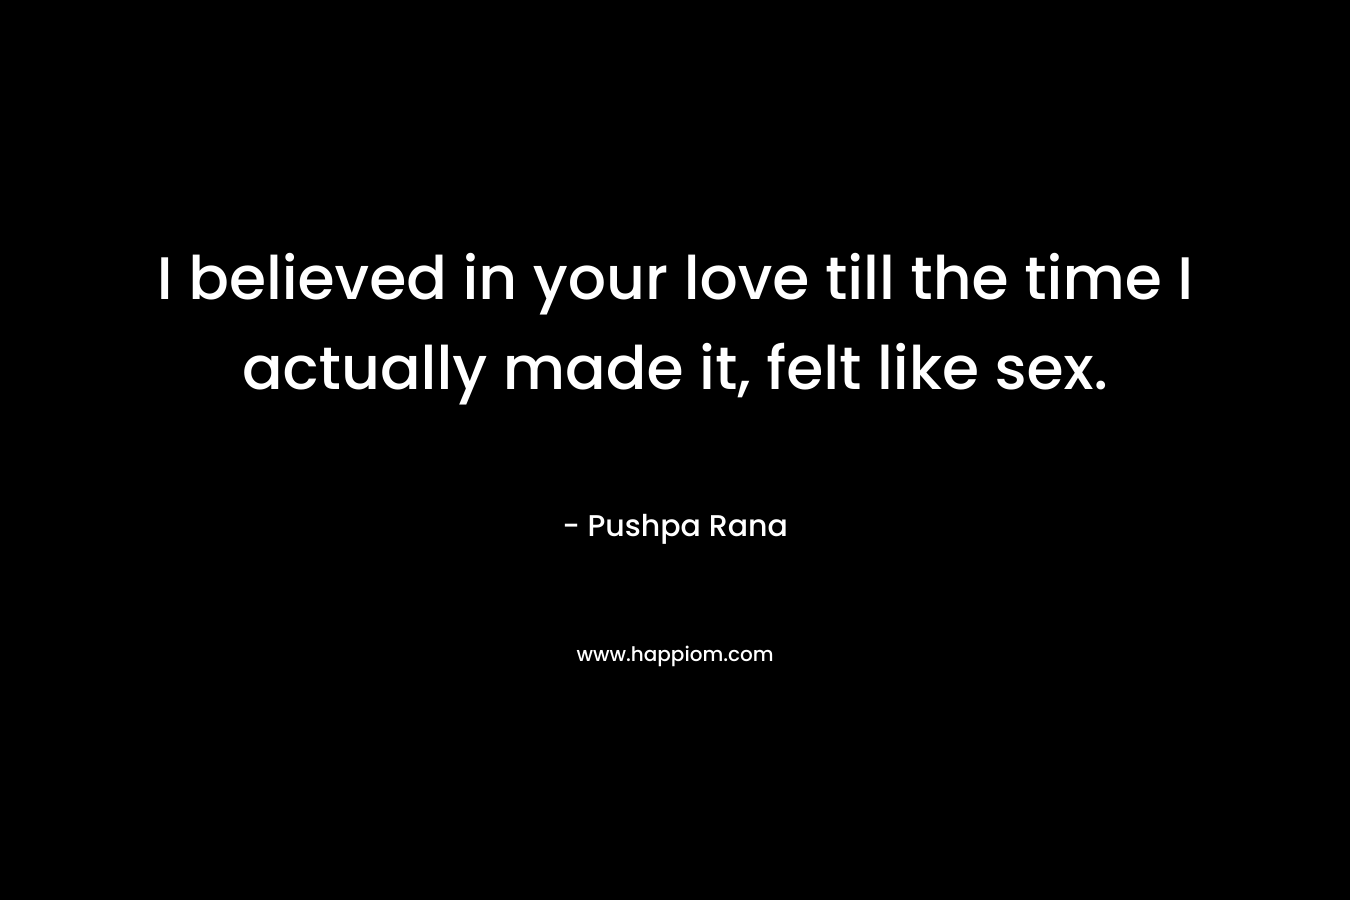 I believed in your love till the time I actually made it, felt like sex. – Pushpa Rana